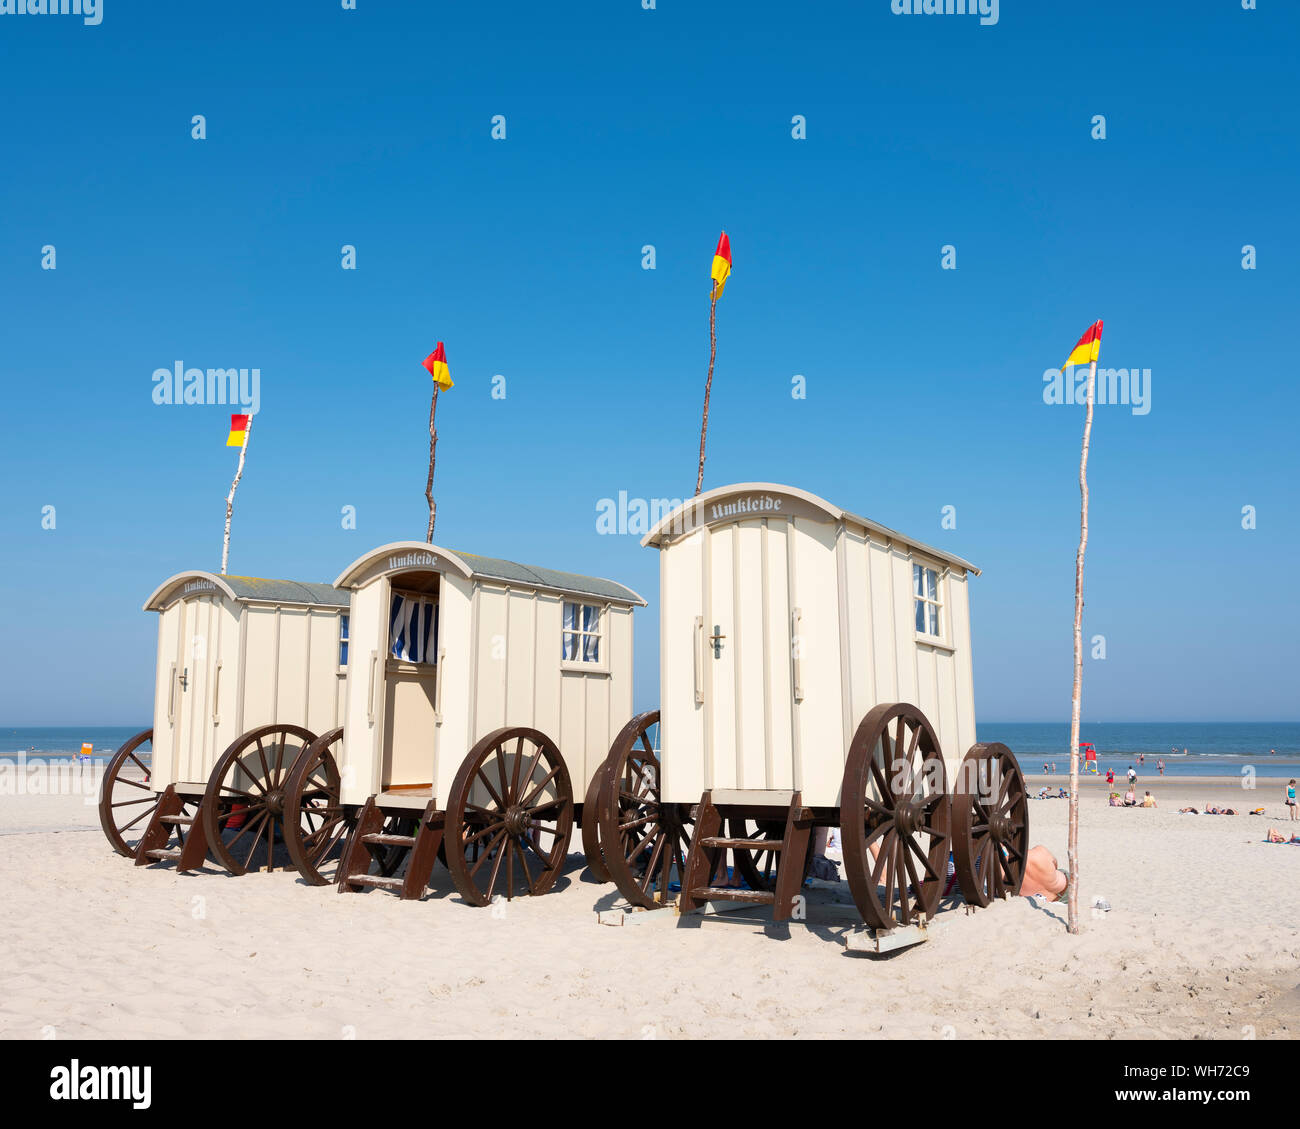 old fashioned bathing carts used for changing on sunny beach of german island norderney Stock Photo